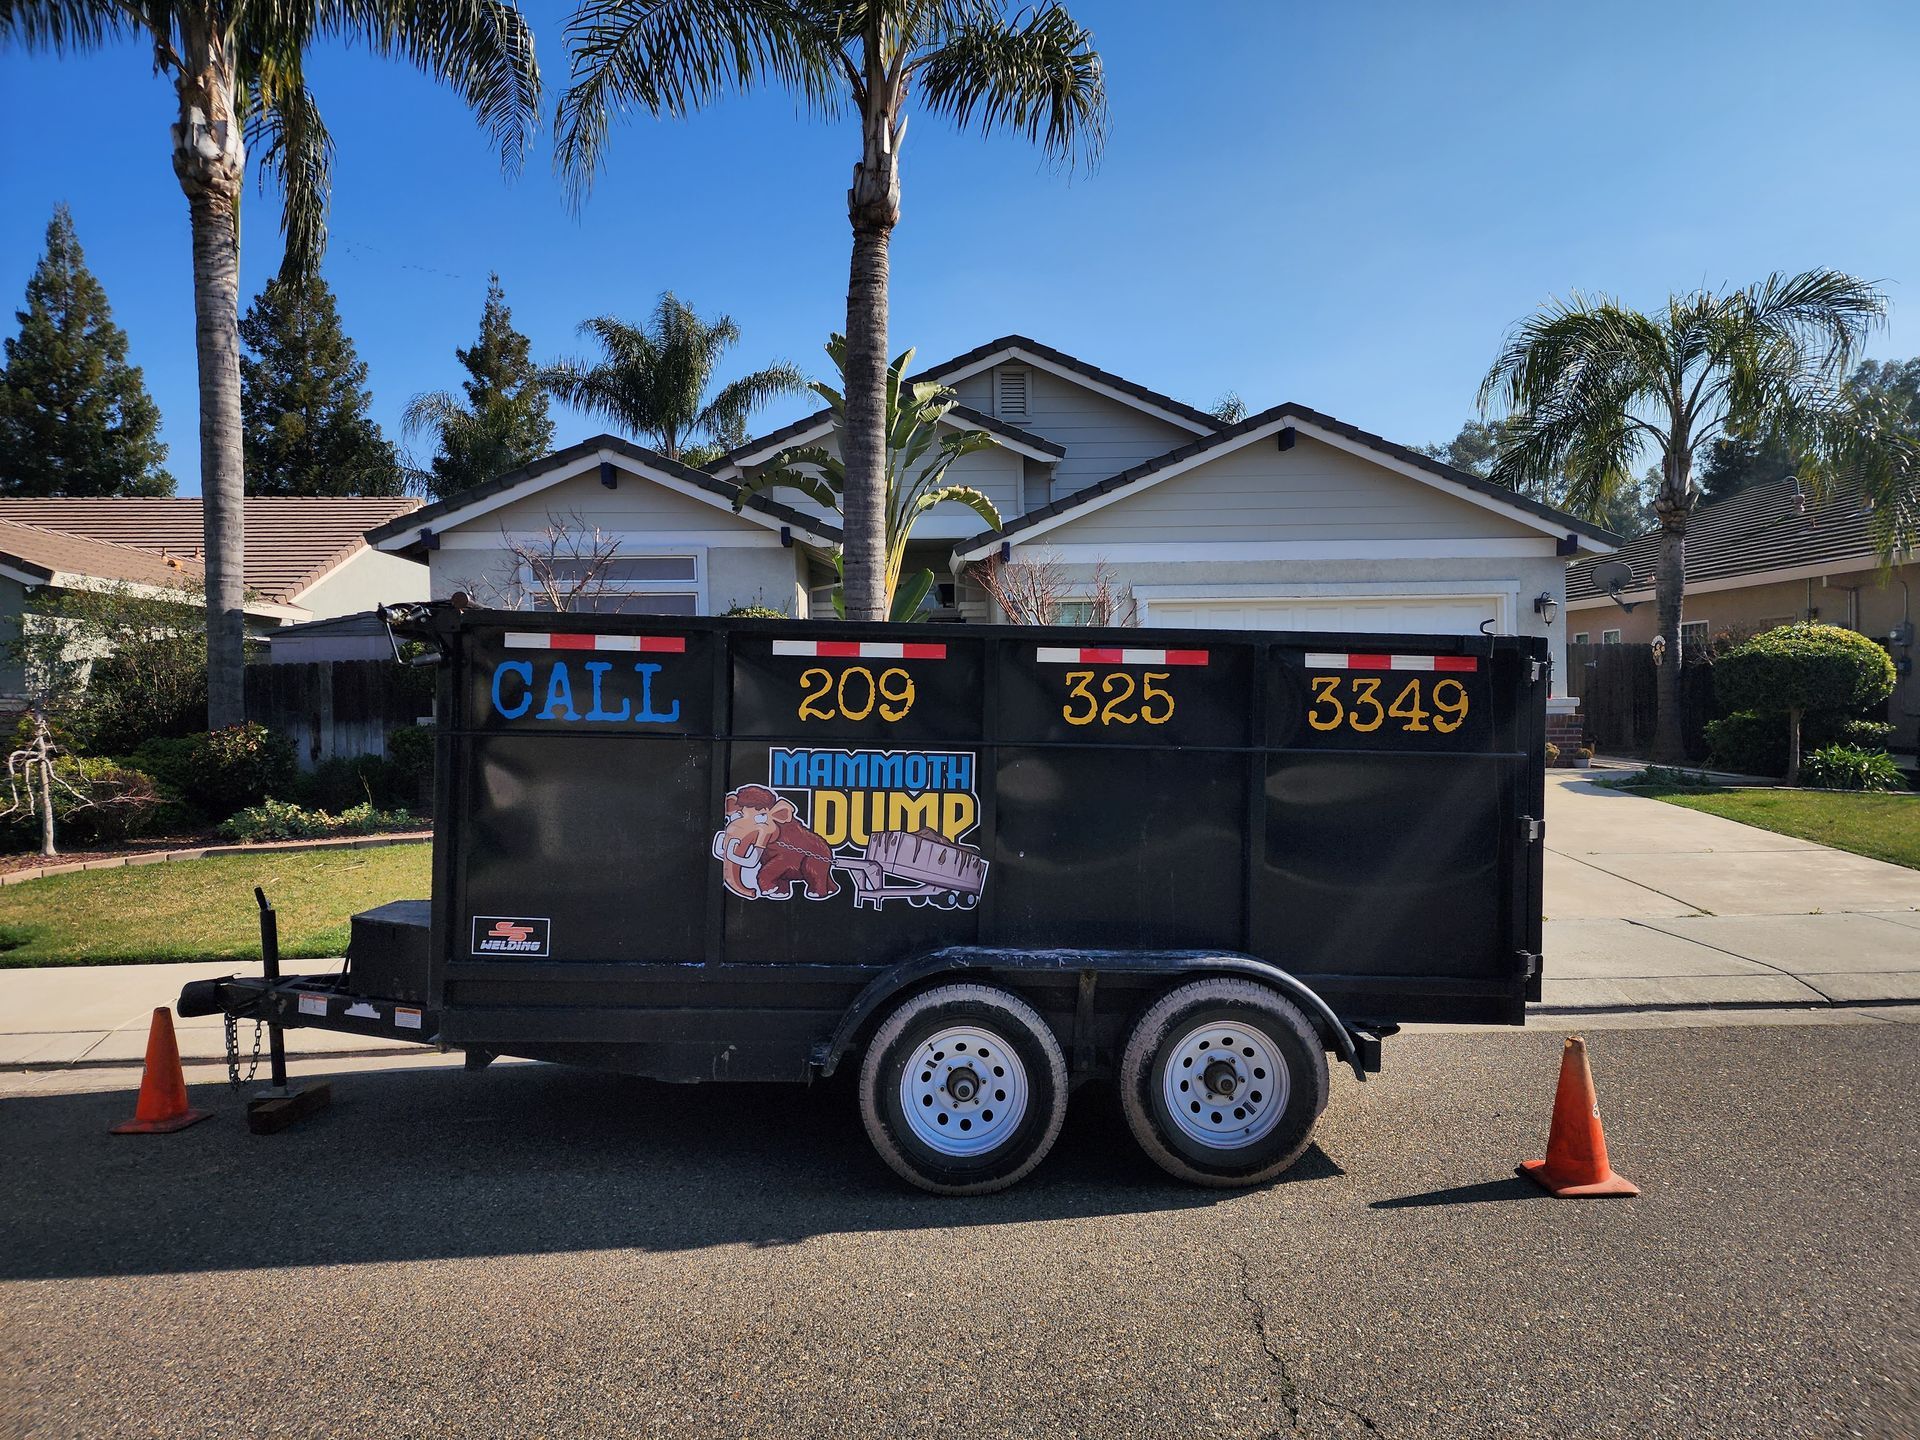 11 yard dumpster set up in front of a home with palm trees